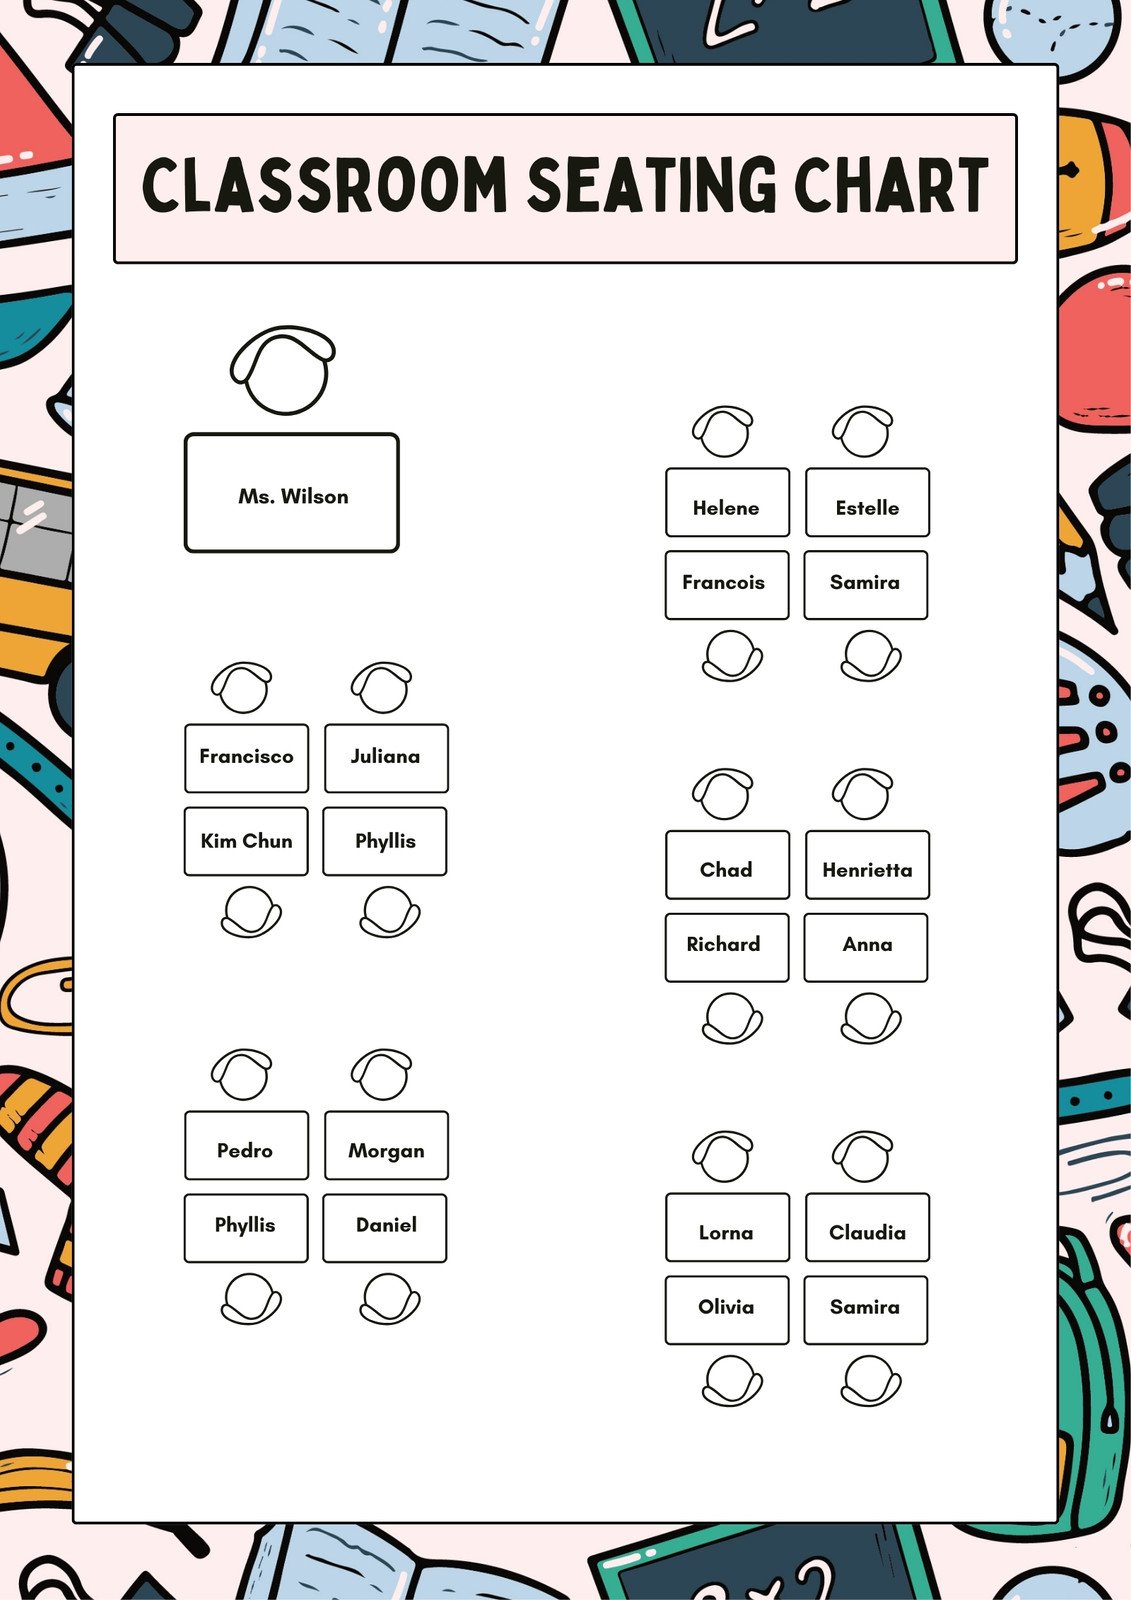 Classroom Seating Chart in White and Pink Doodle Style 